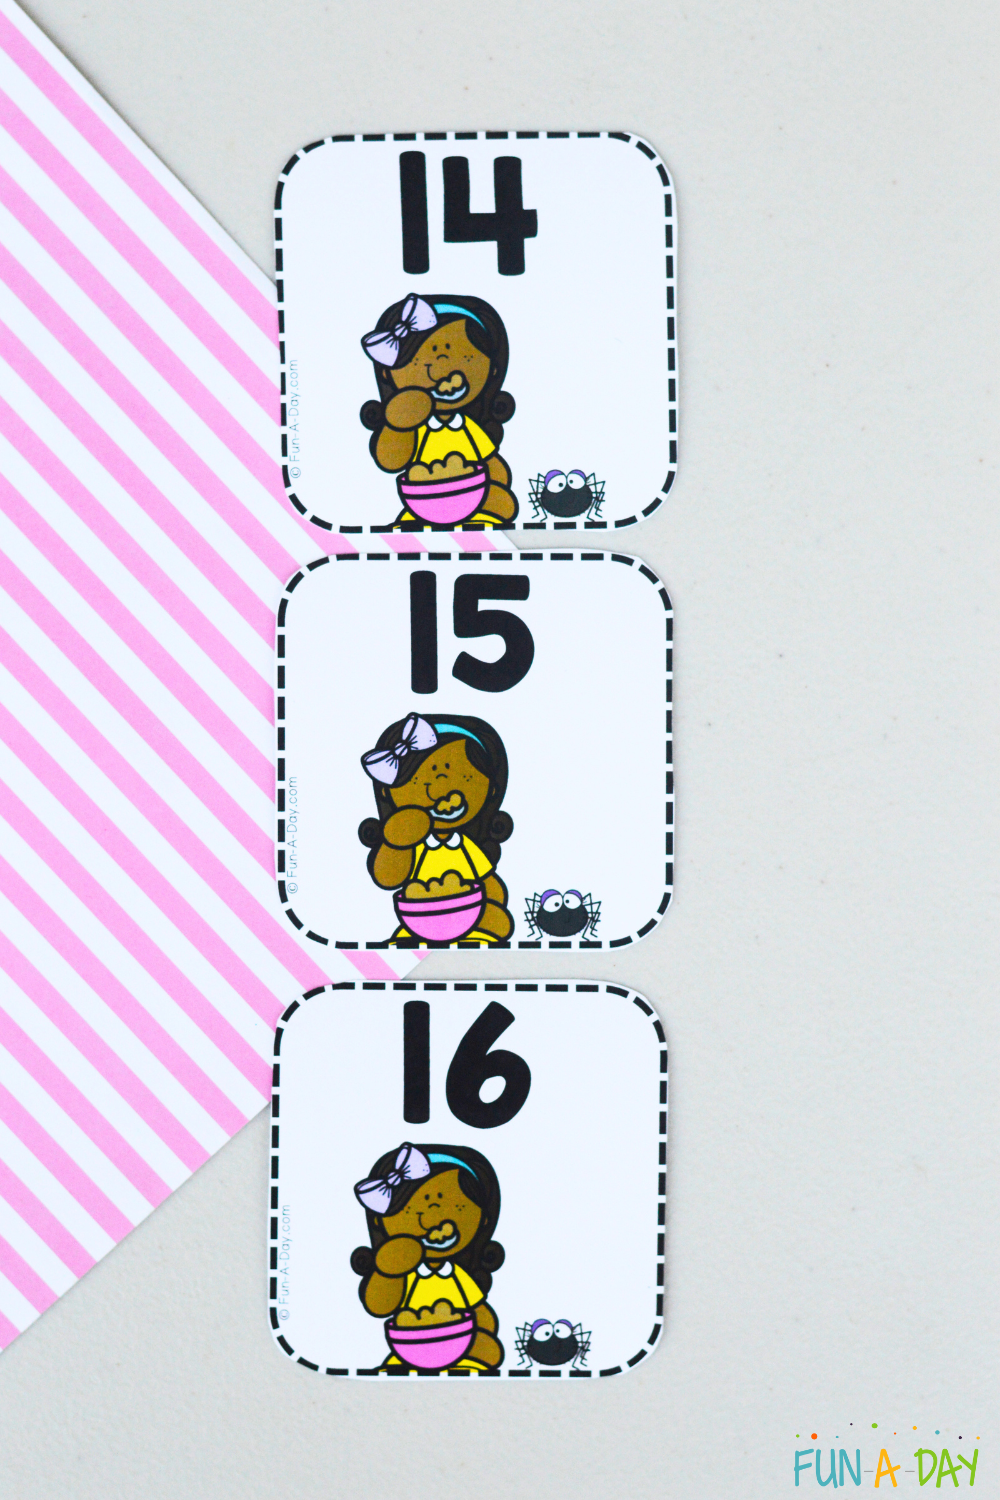 Little Miss Muffet calendar numbers 14, 15, and 16 placed in numerical order.